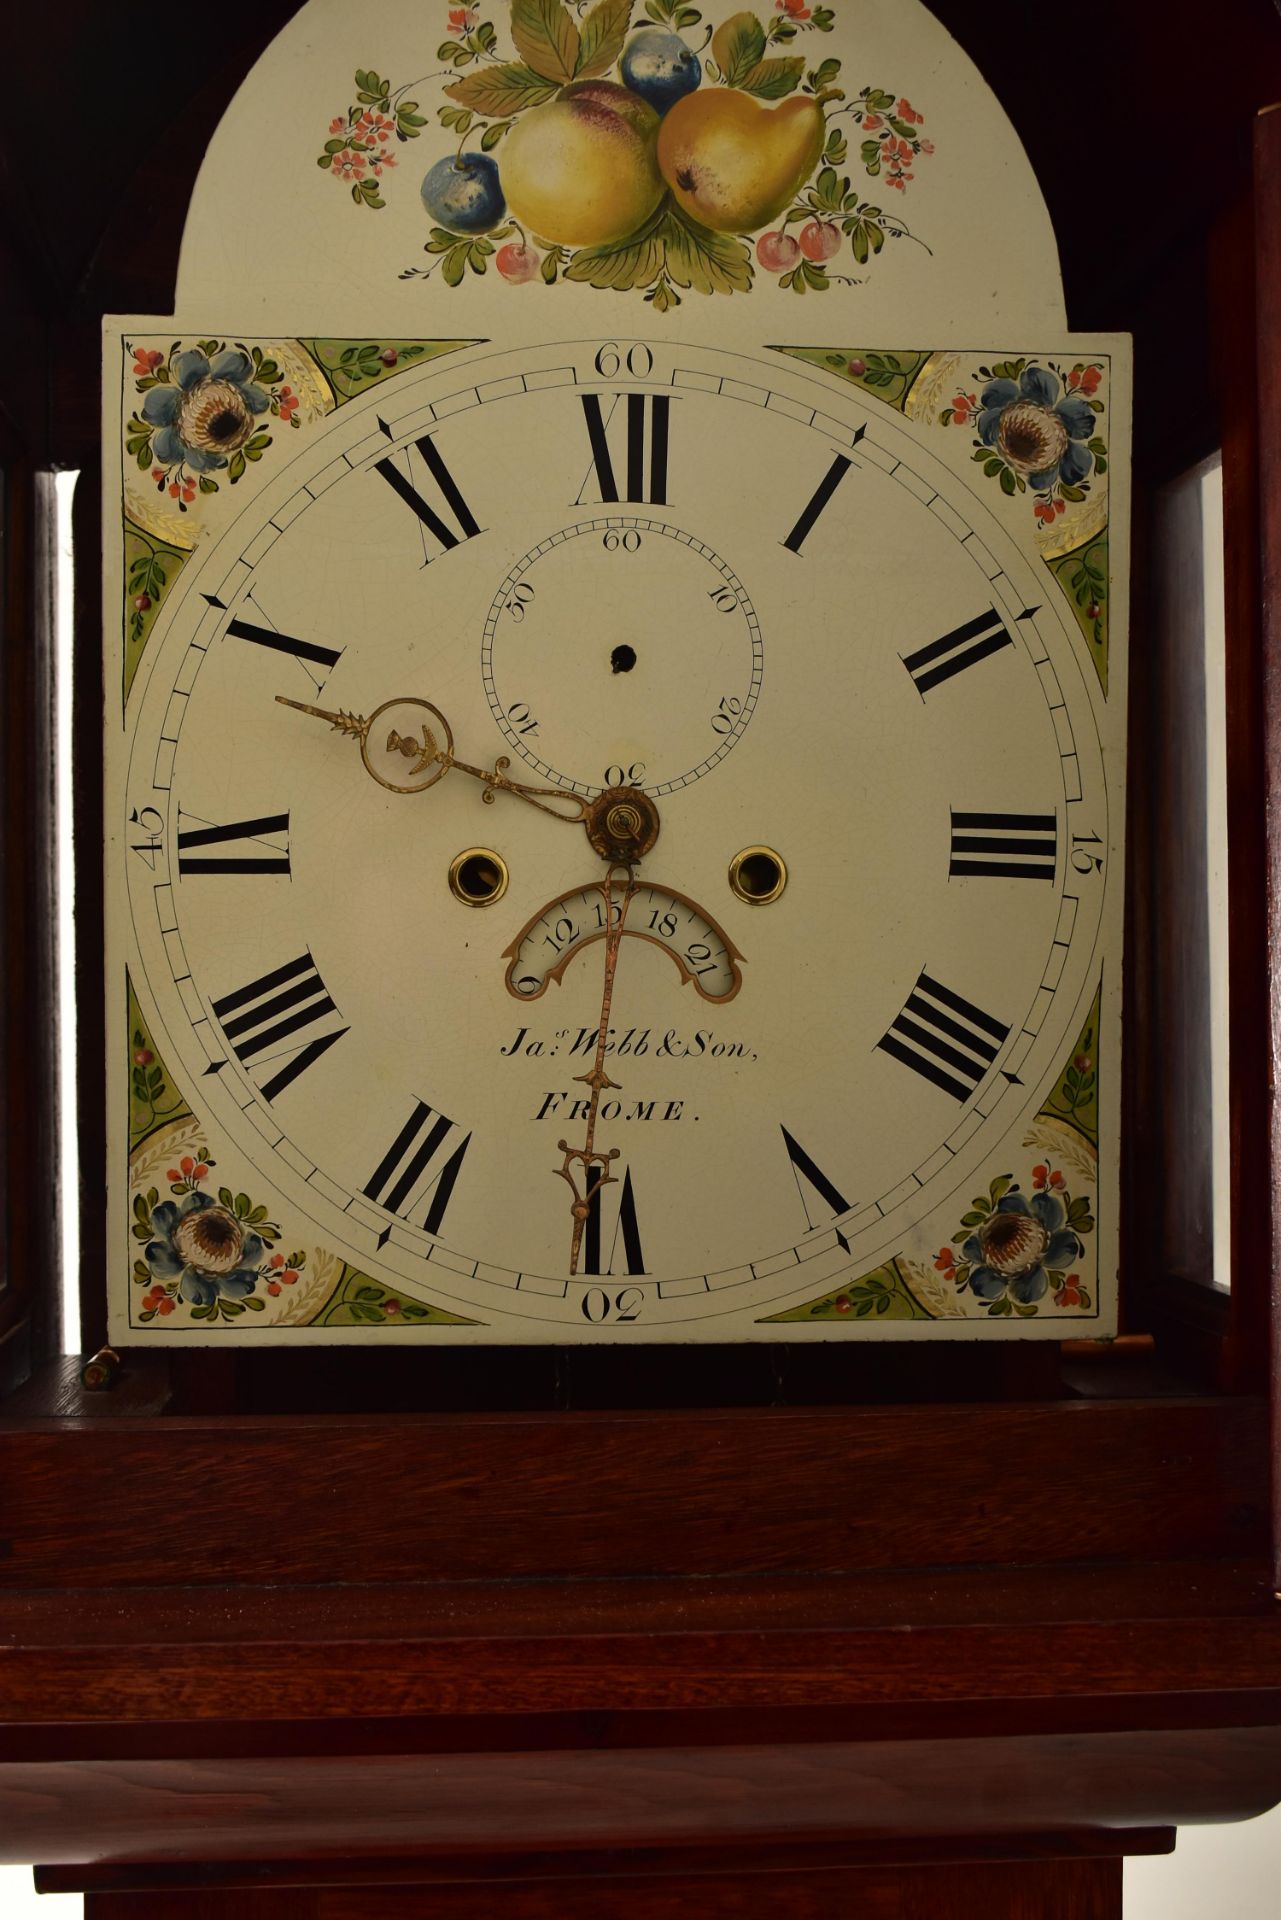 JAMES WEBB & SON OF FROME WEST COUNTRY LONGCASE CLOCK - Image 2 of 11